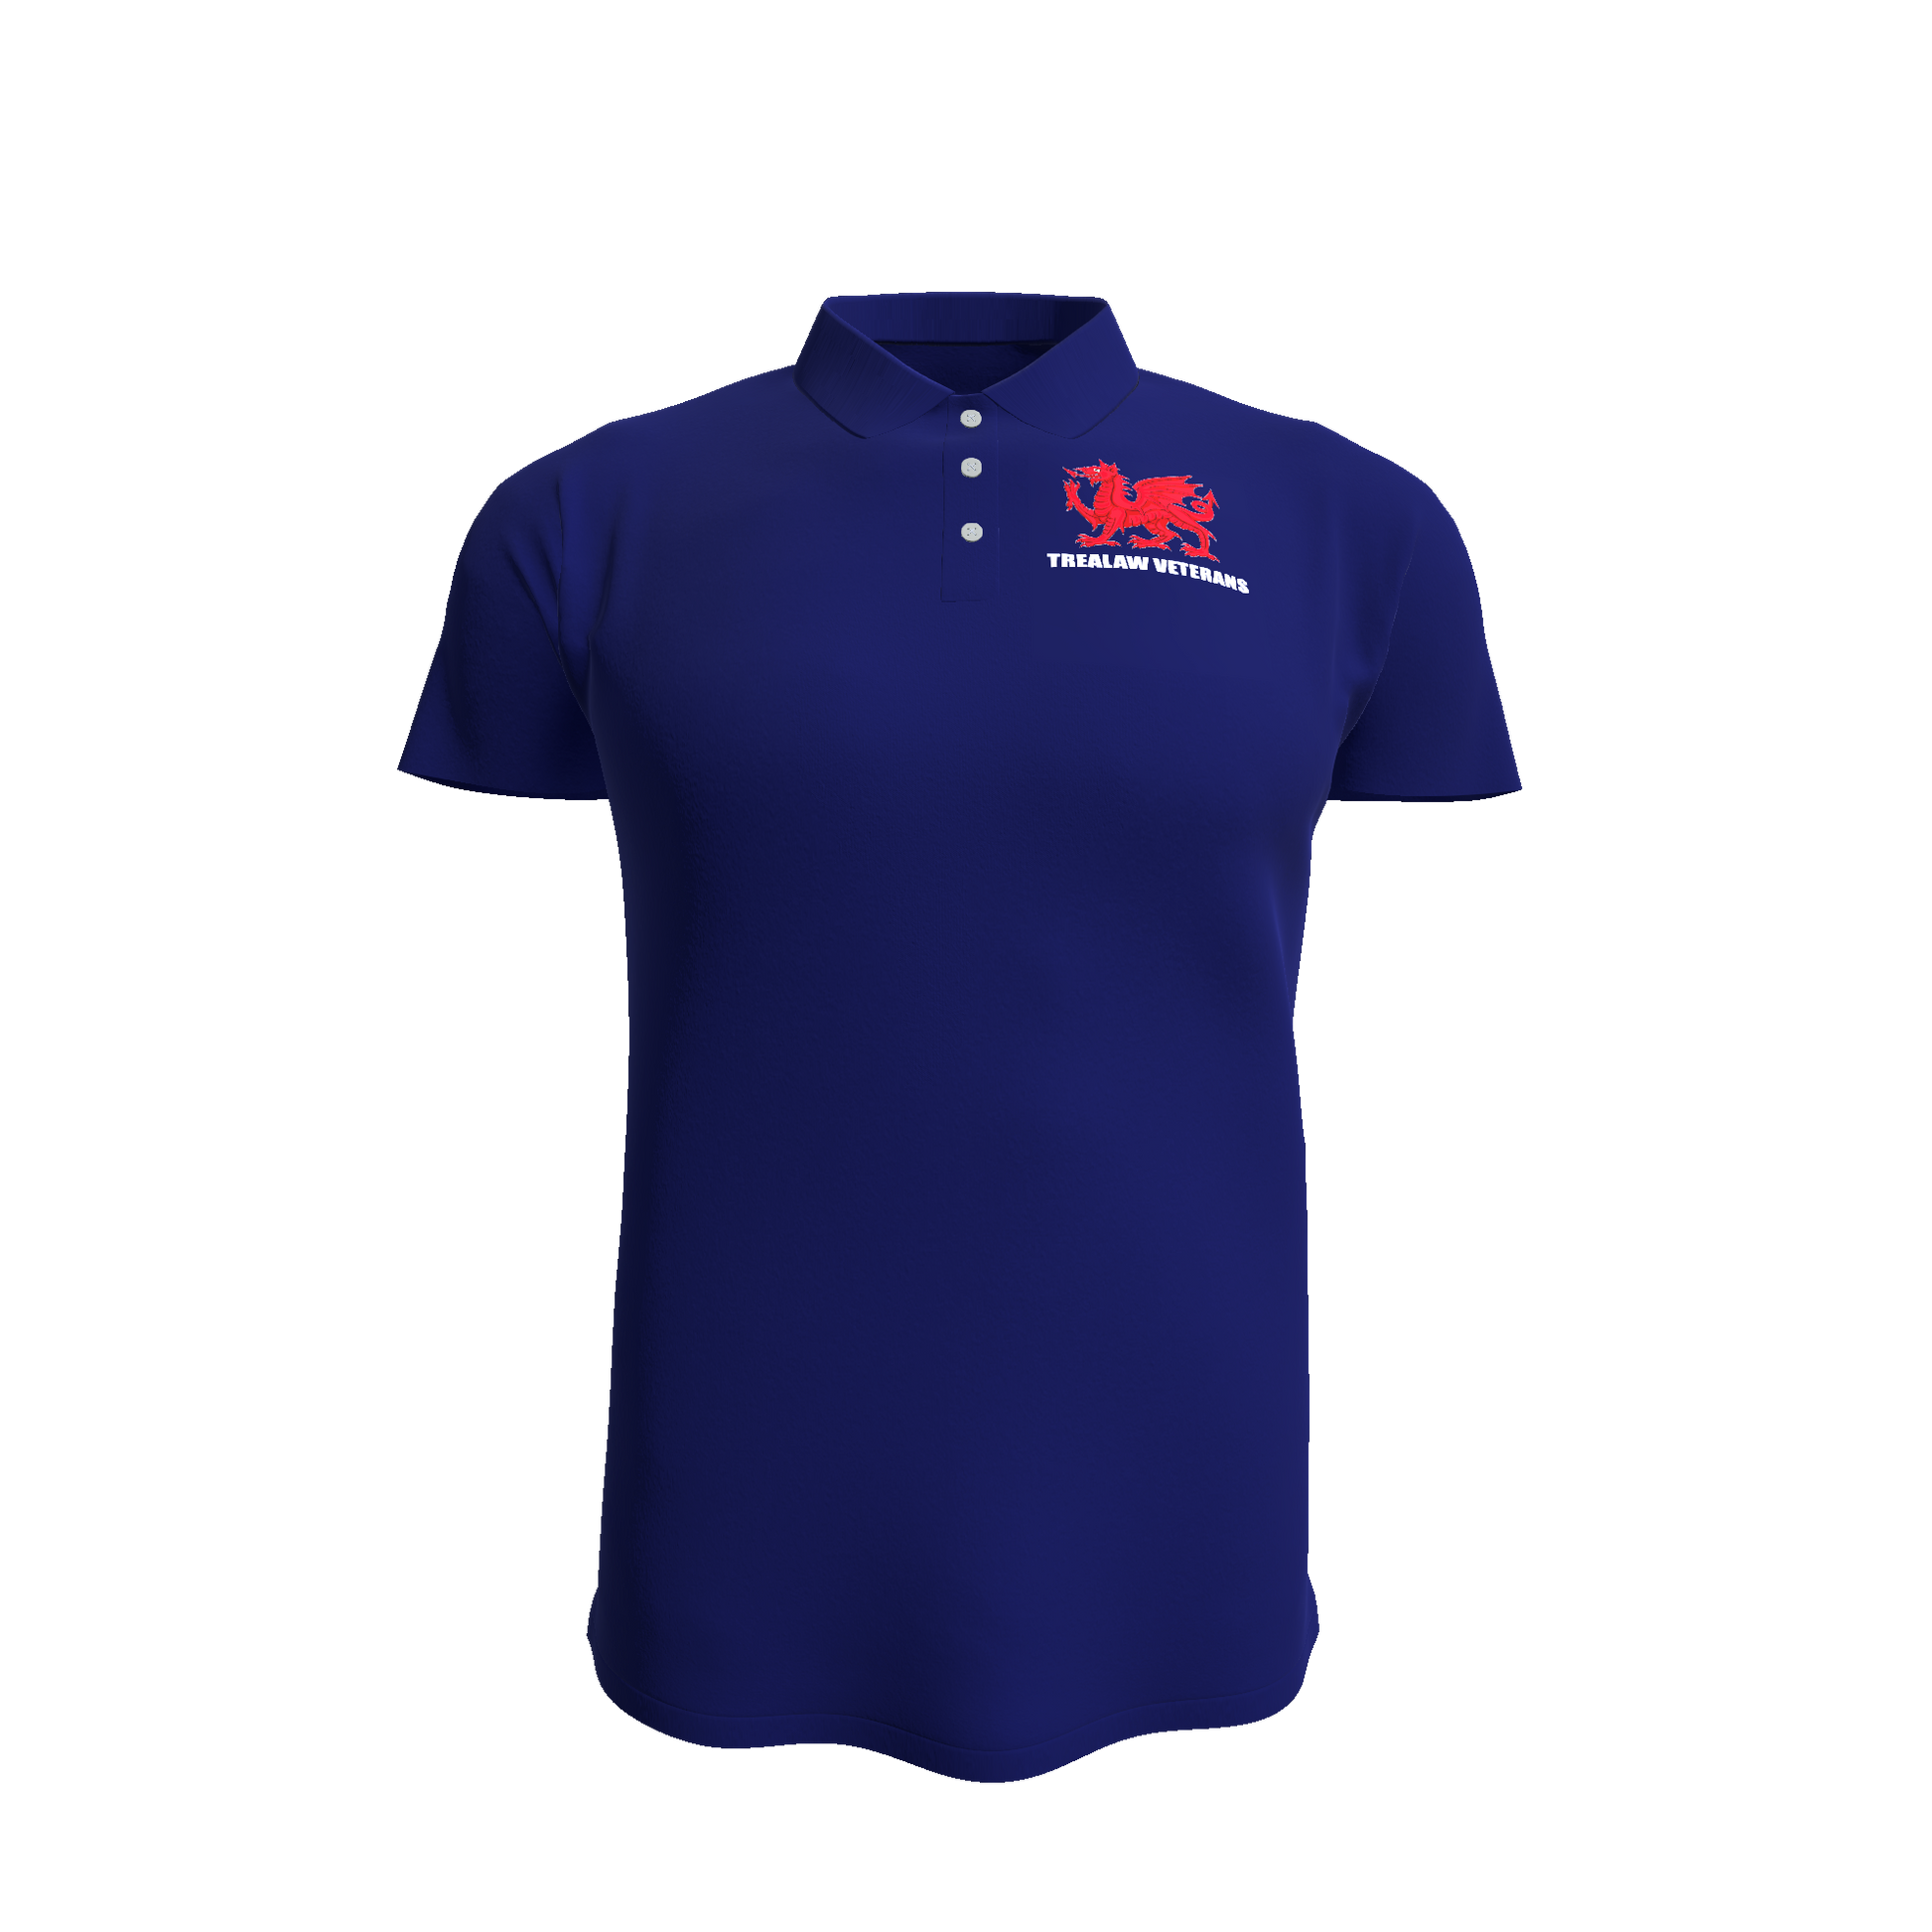 TREALAW VETERANS Welsh dragon Polo Top - Army 1157 kit S / Navy Blue Army 1157 Kit Veterans Owned Business